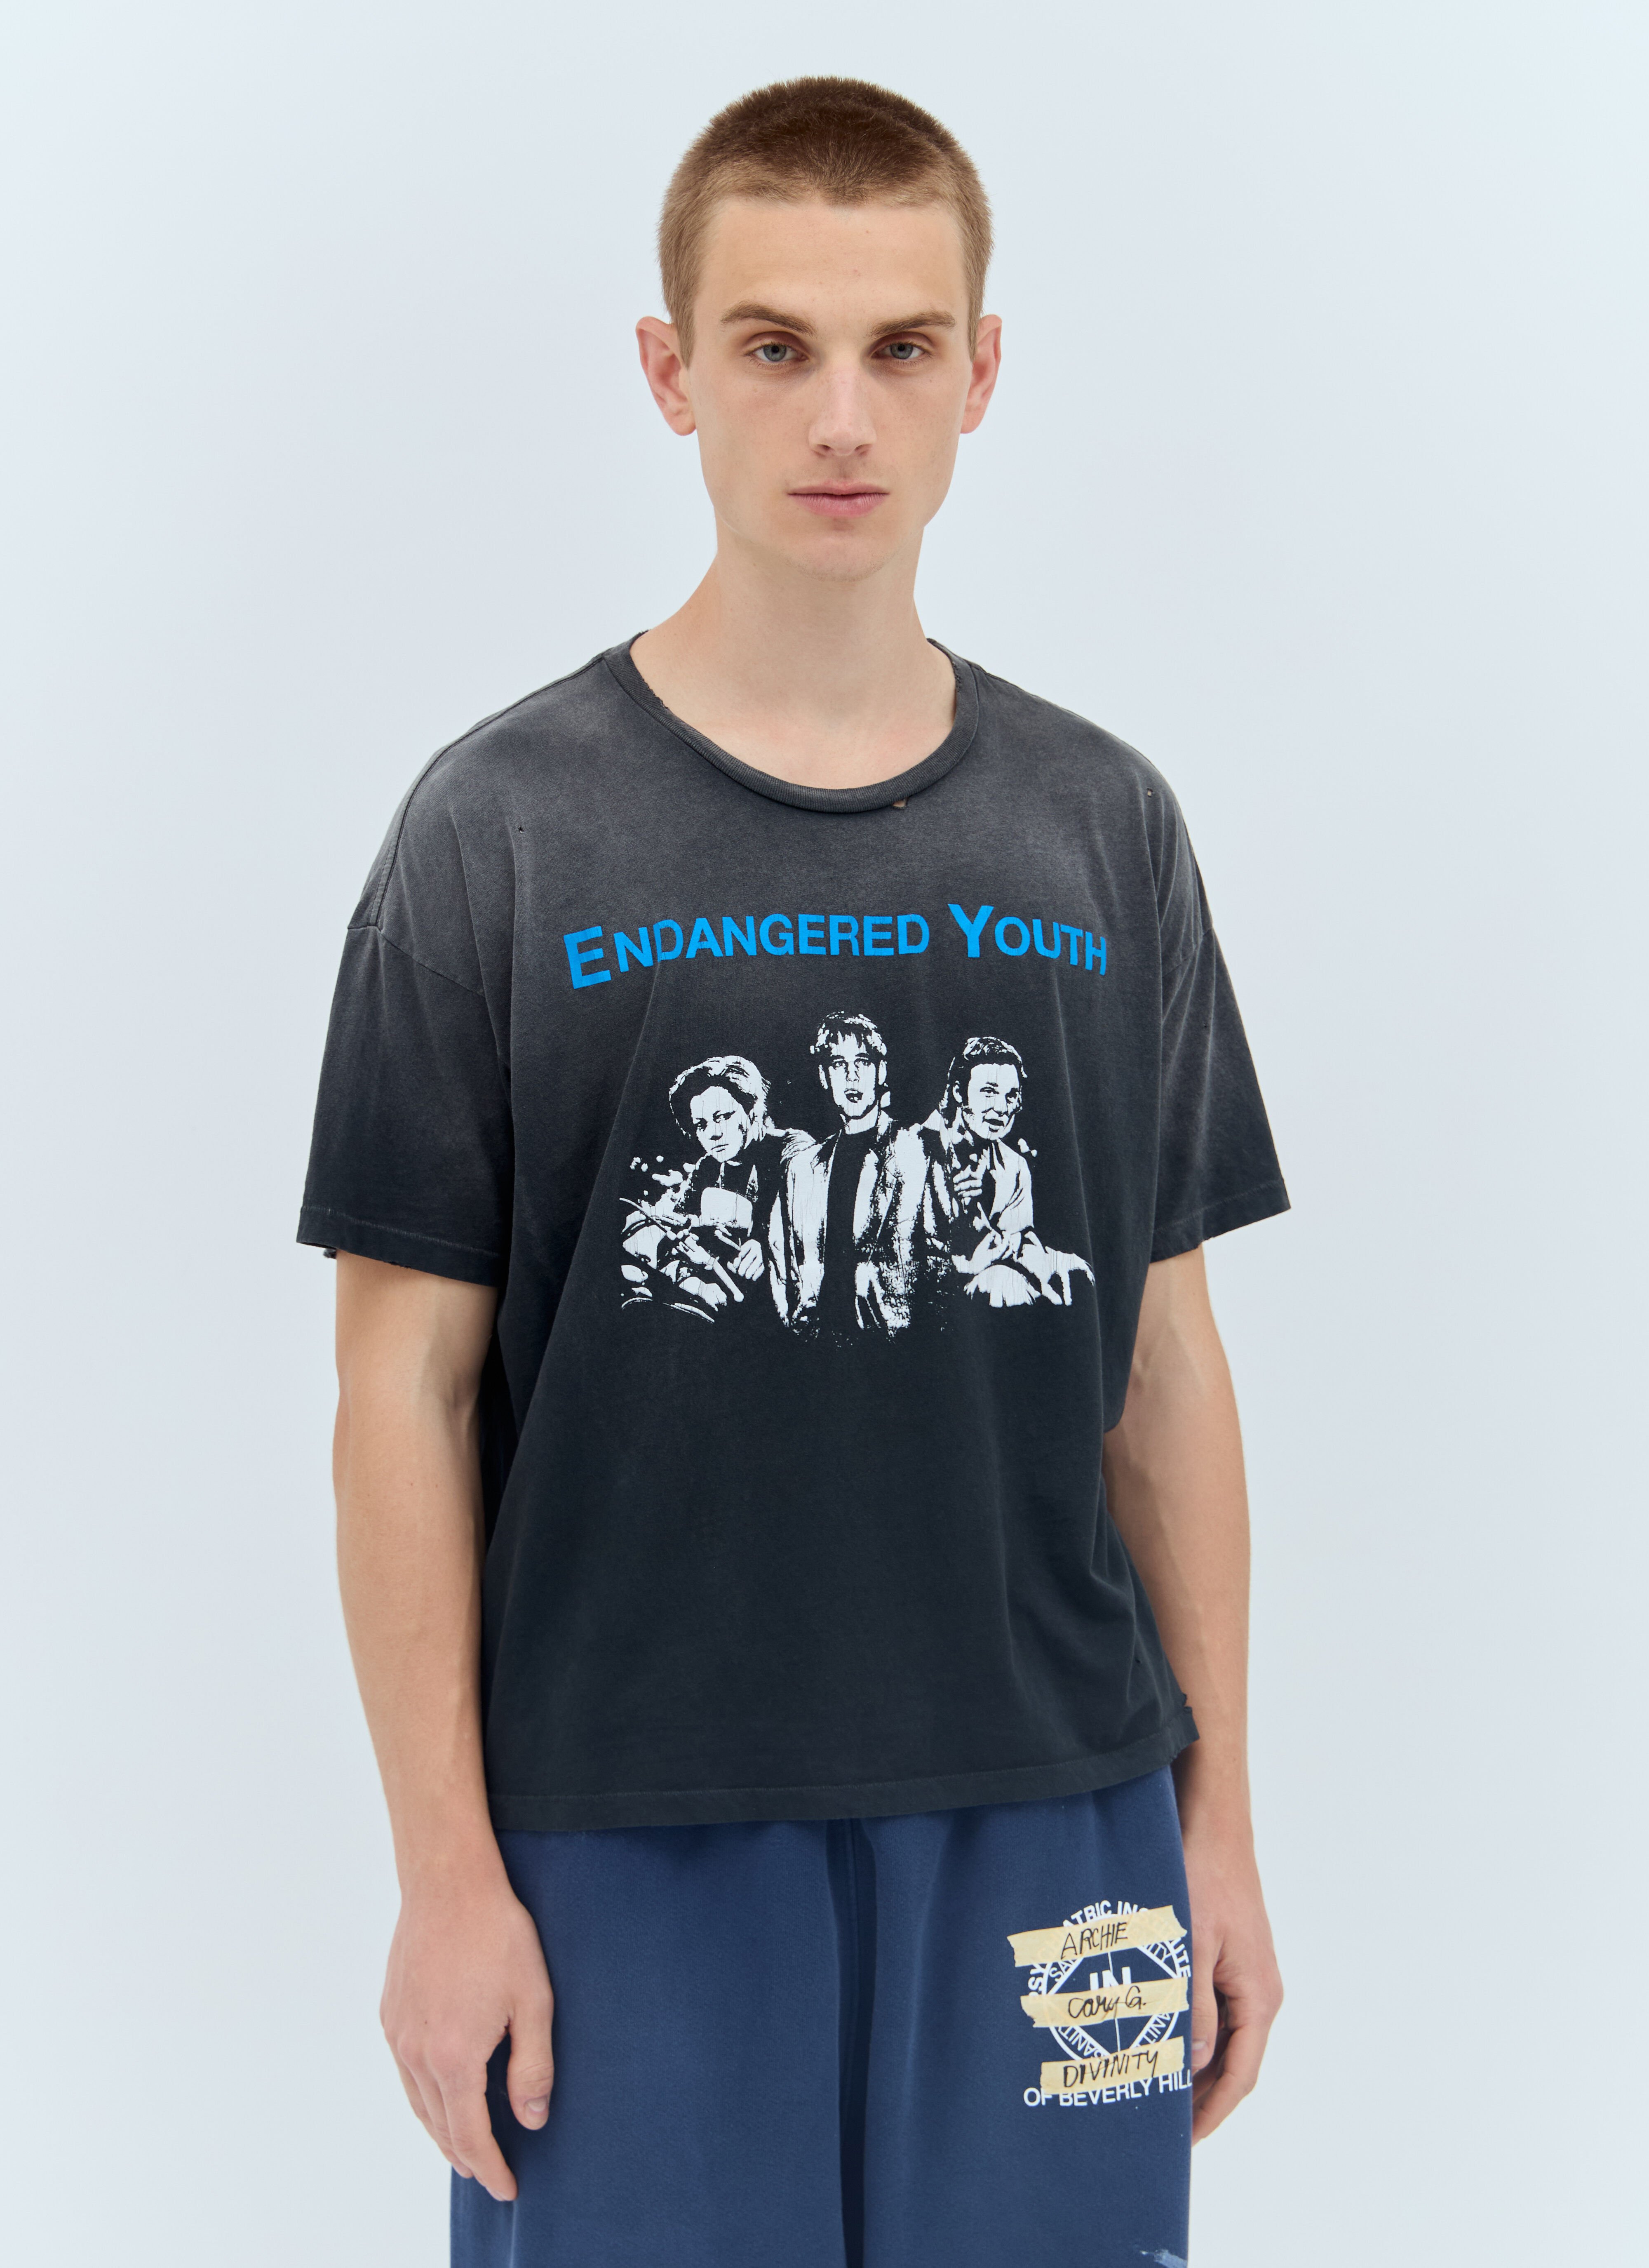 adidas by Wales Bonner Endangered Youth T-Shirt Blue awb0357005